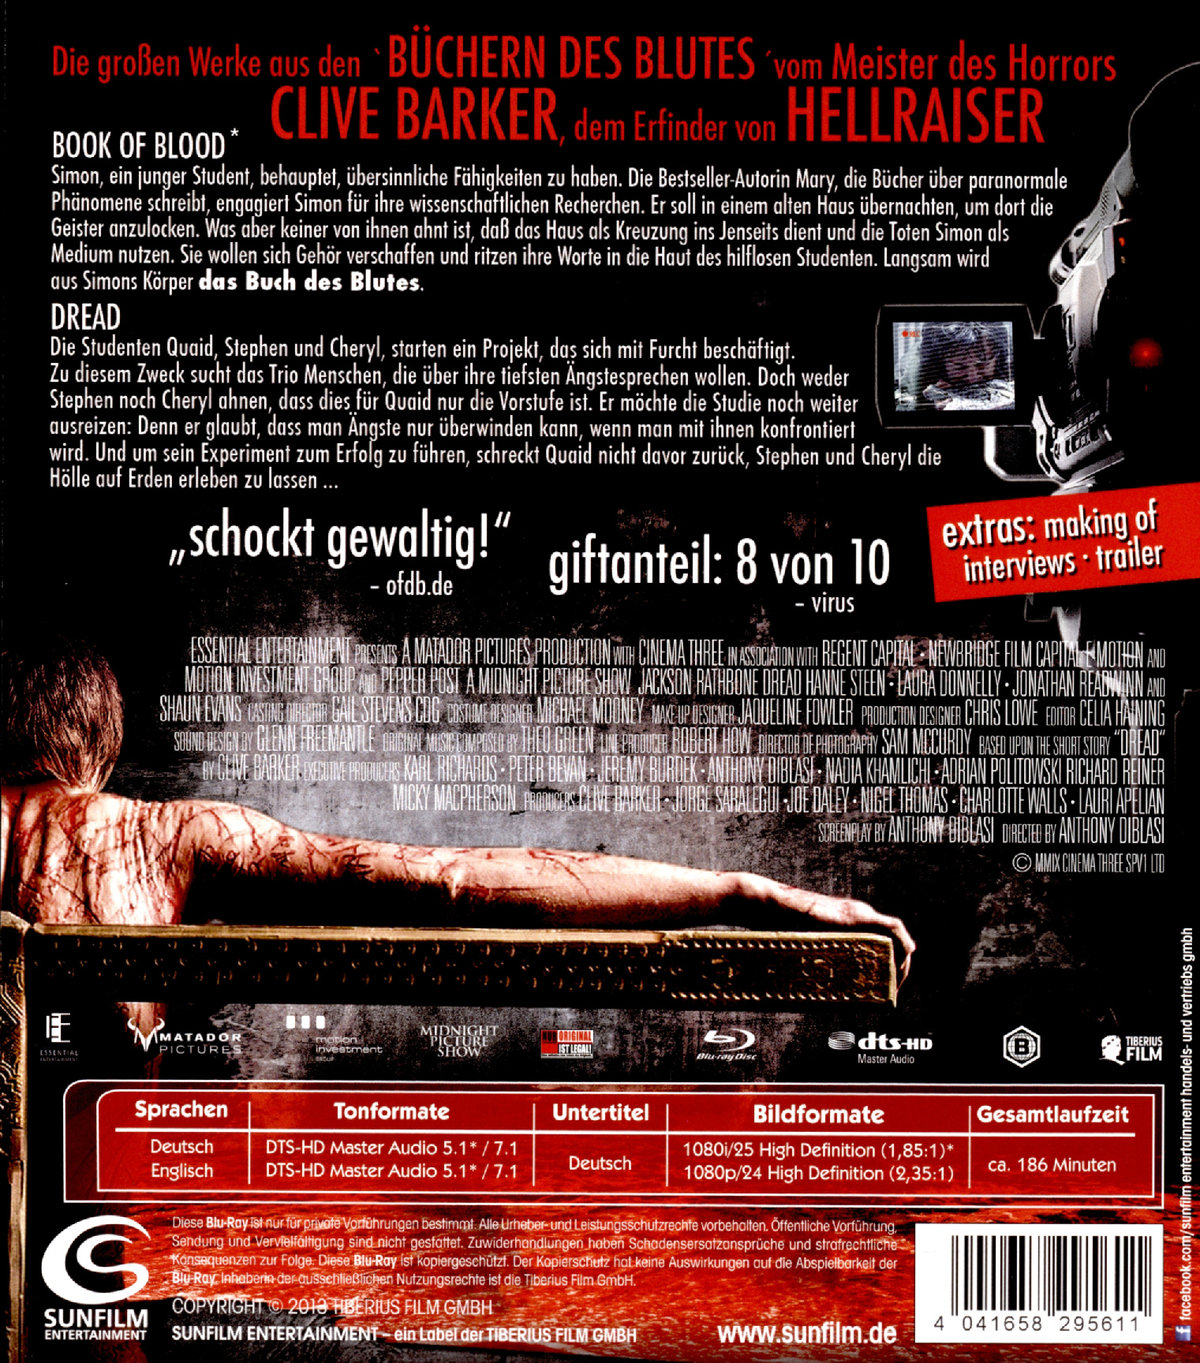 Clive Barker Box - Book of Blood/Dread (blu-ray)